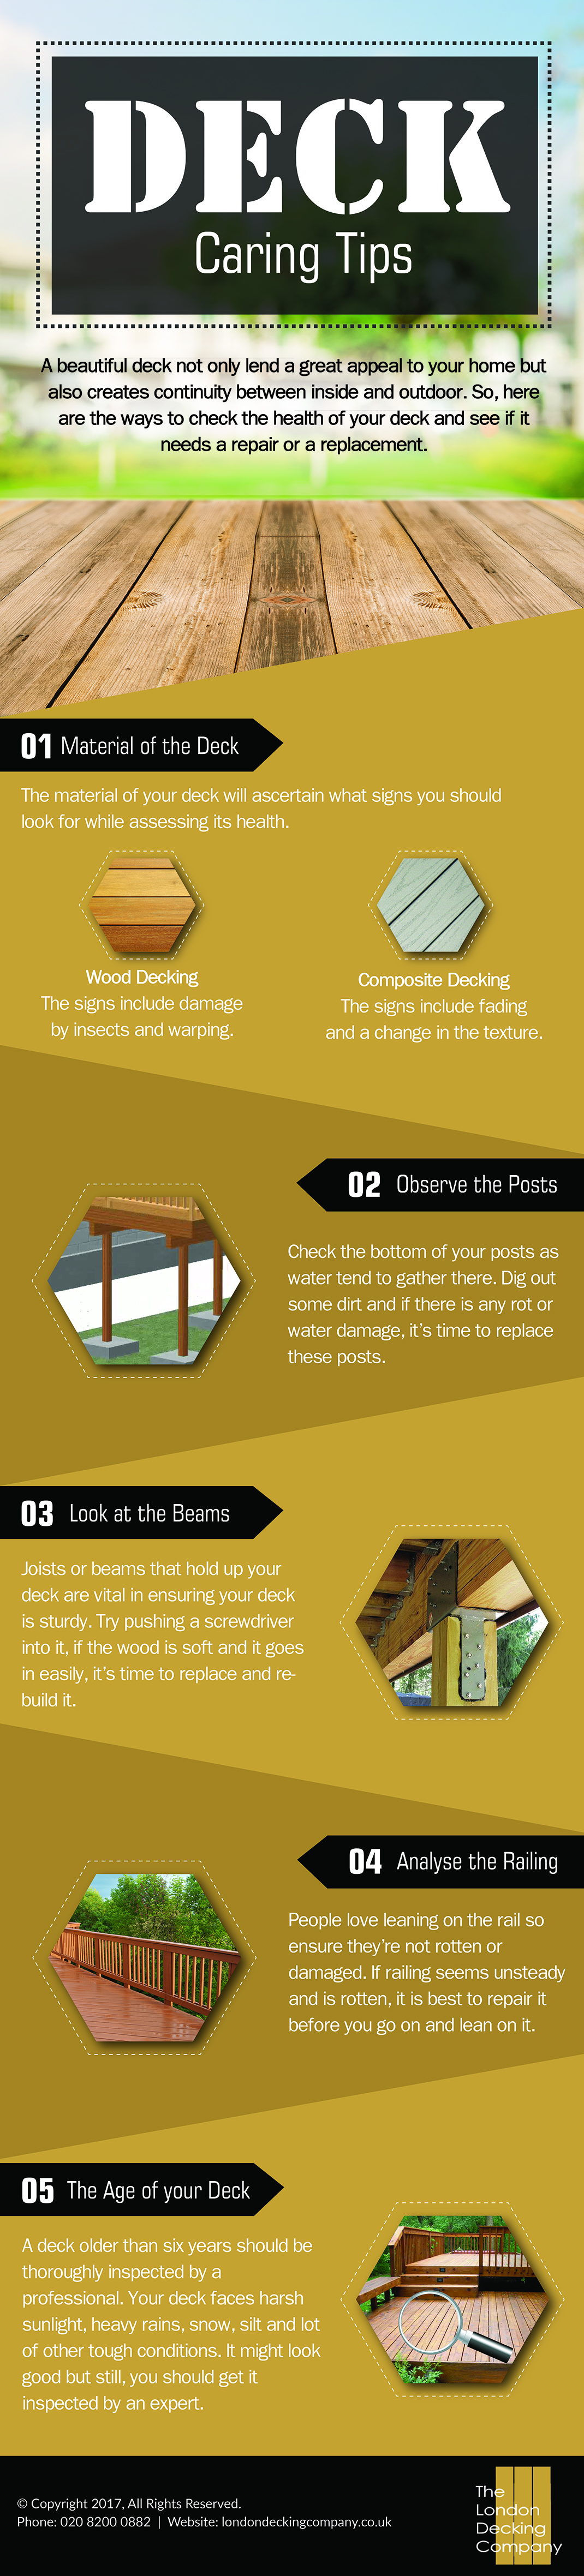 Deck Caring Tips (Infographic)